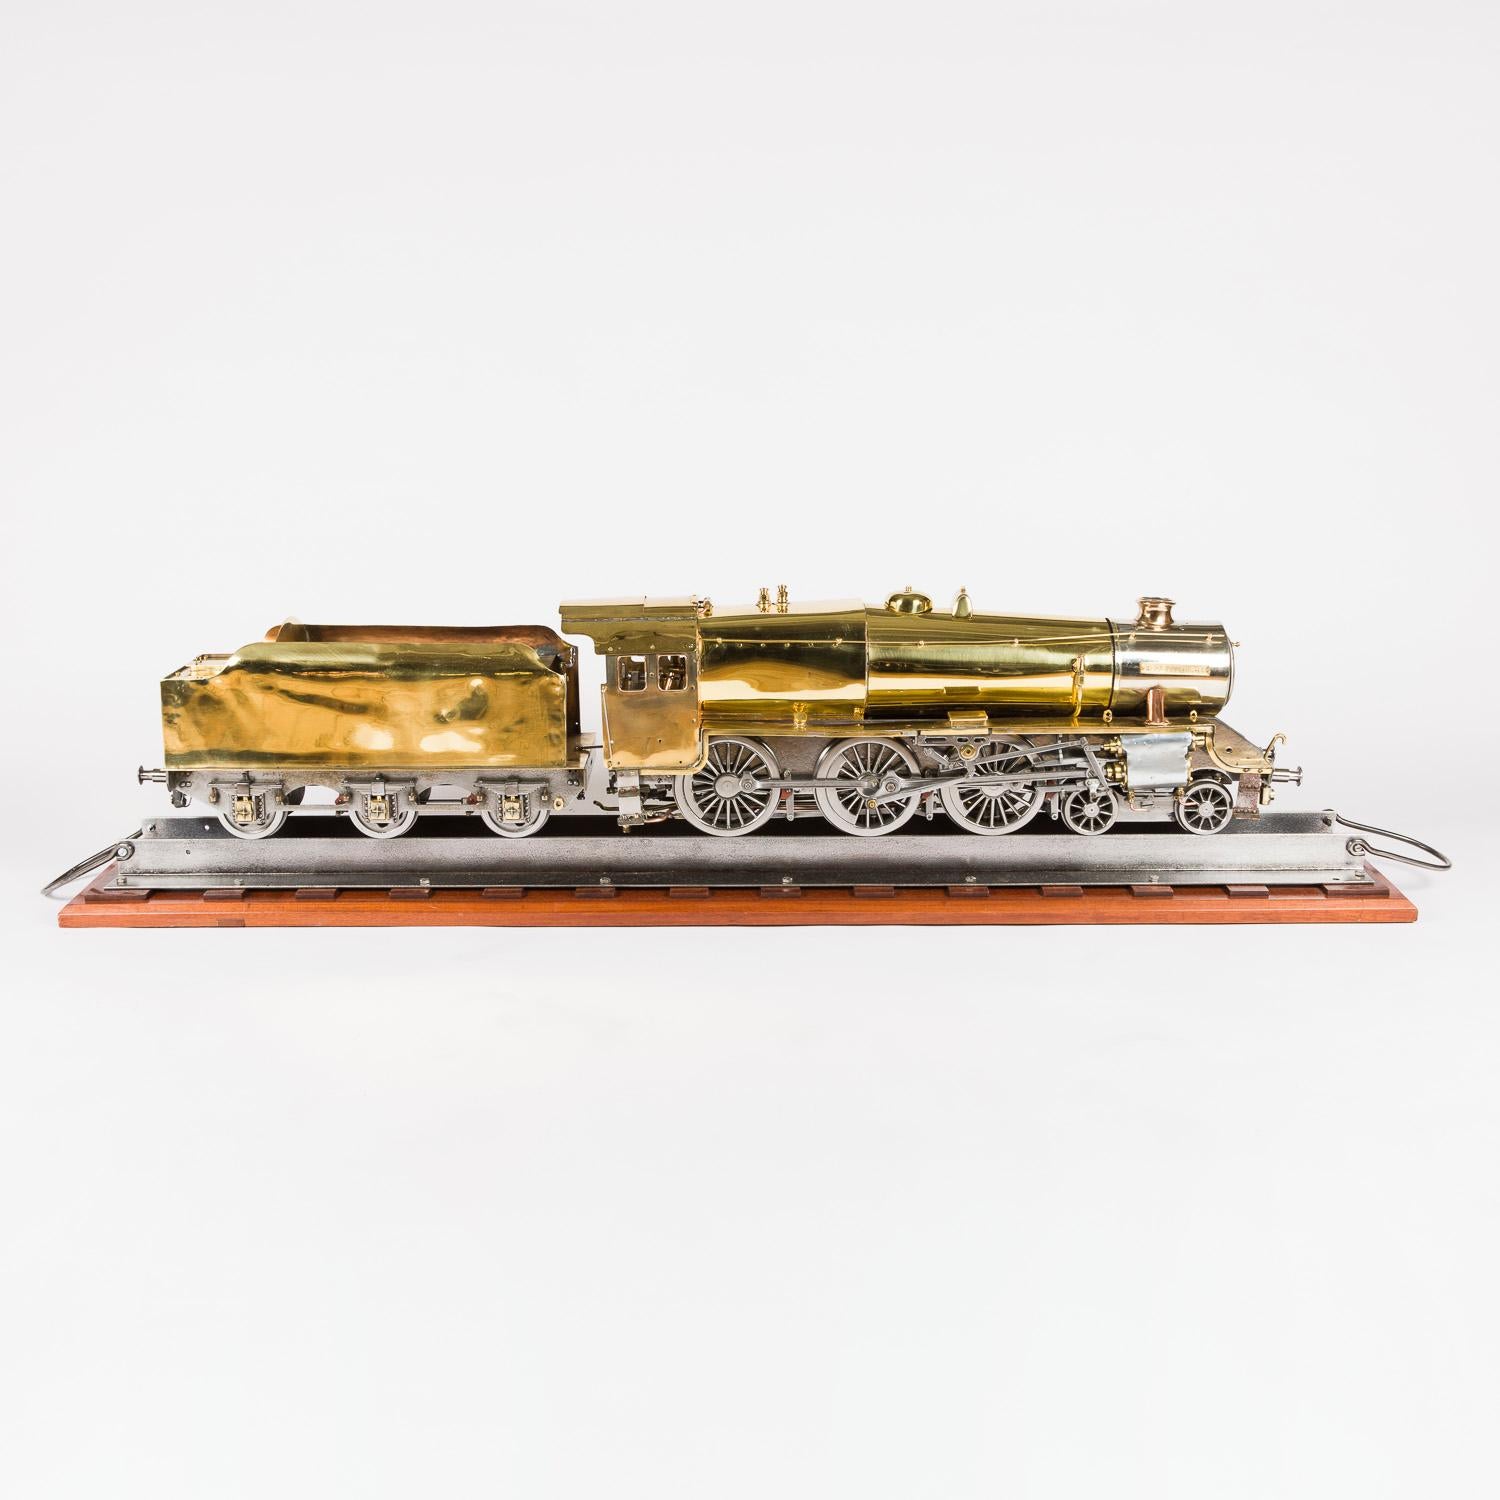 3 ½ inch gauge model of the 4-6-0 steam locomotive the Black Knight. Circa 1955.

Mounted on a display track.

Length of Locomotive: 31 inches - 79 cm.

Length of Tender: 19 inches - 48 cm.

Length of display track: 56 1/4 inches -143 cm. 

 

The